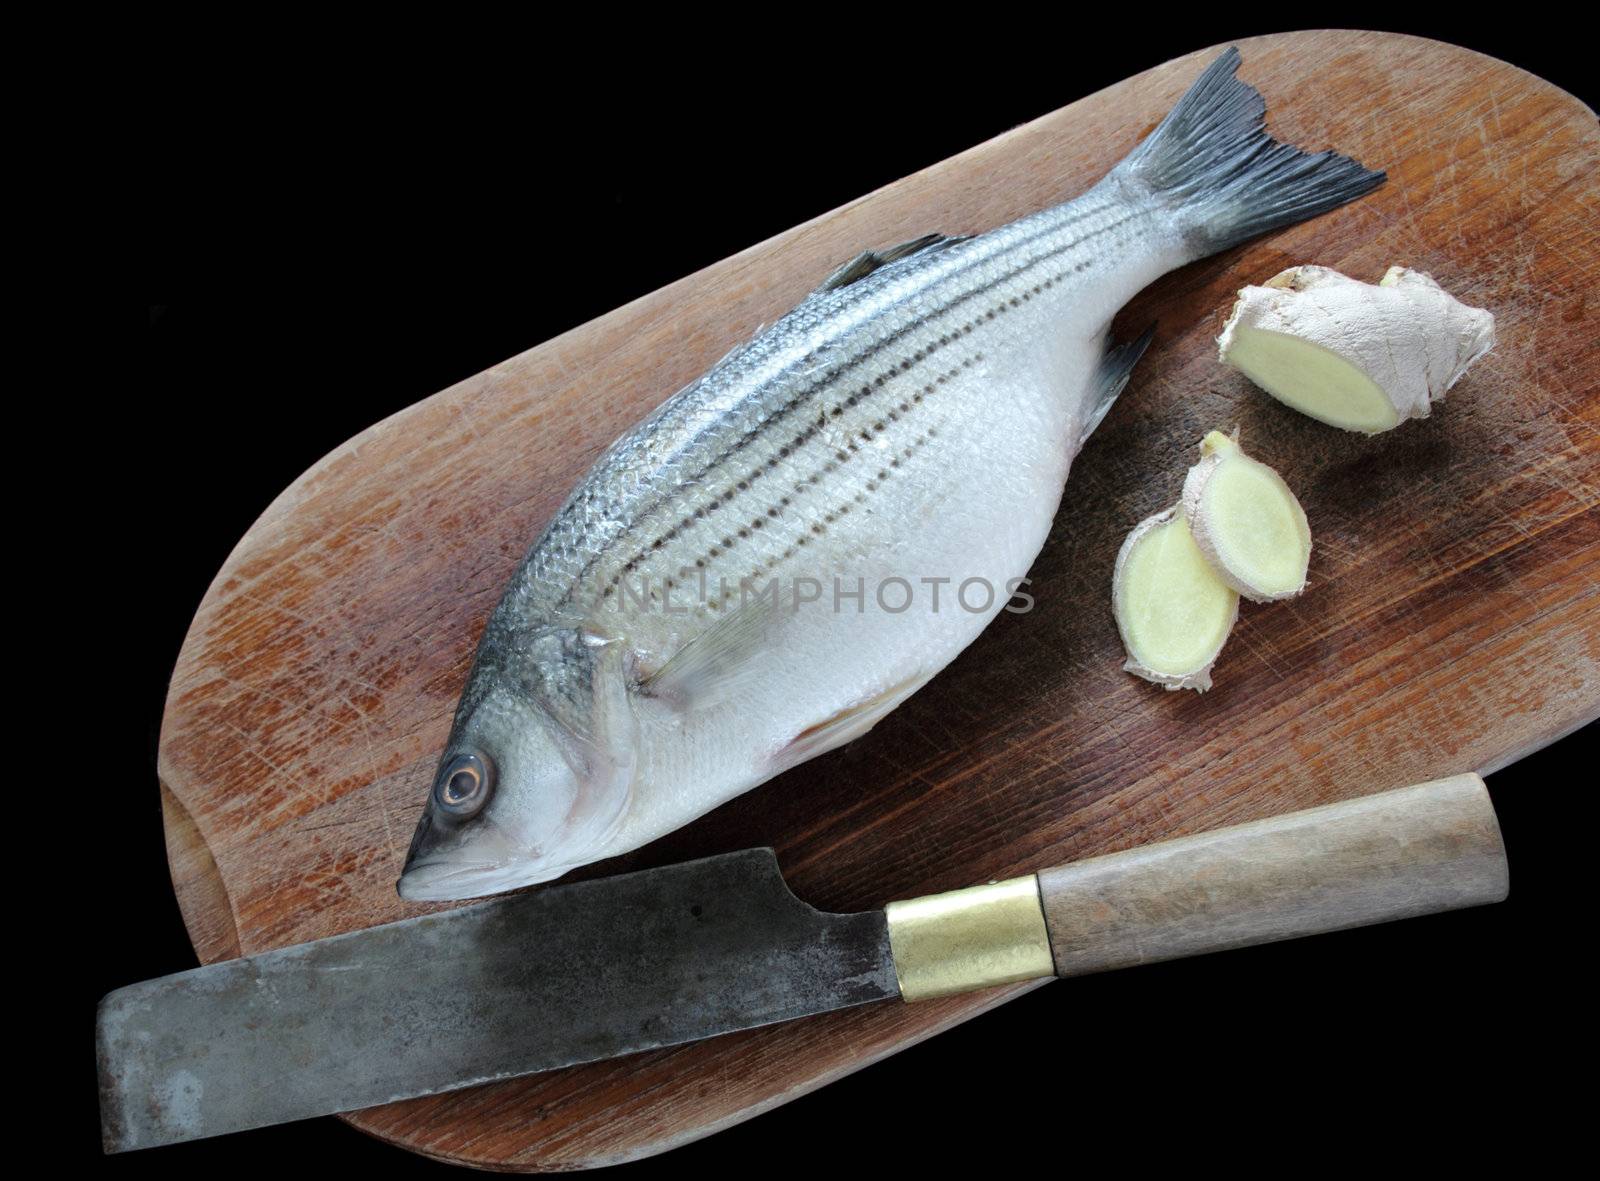 a fresh striped bass and ginger, two ingredients for classic Chinese steamed fish on a cutting board with a knife
